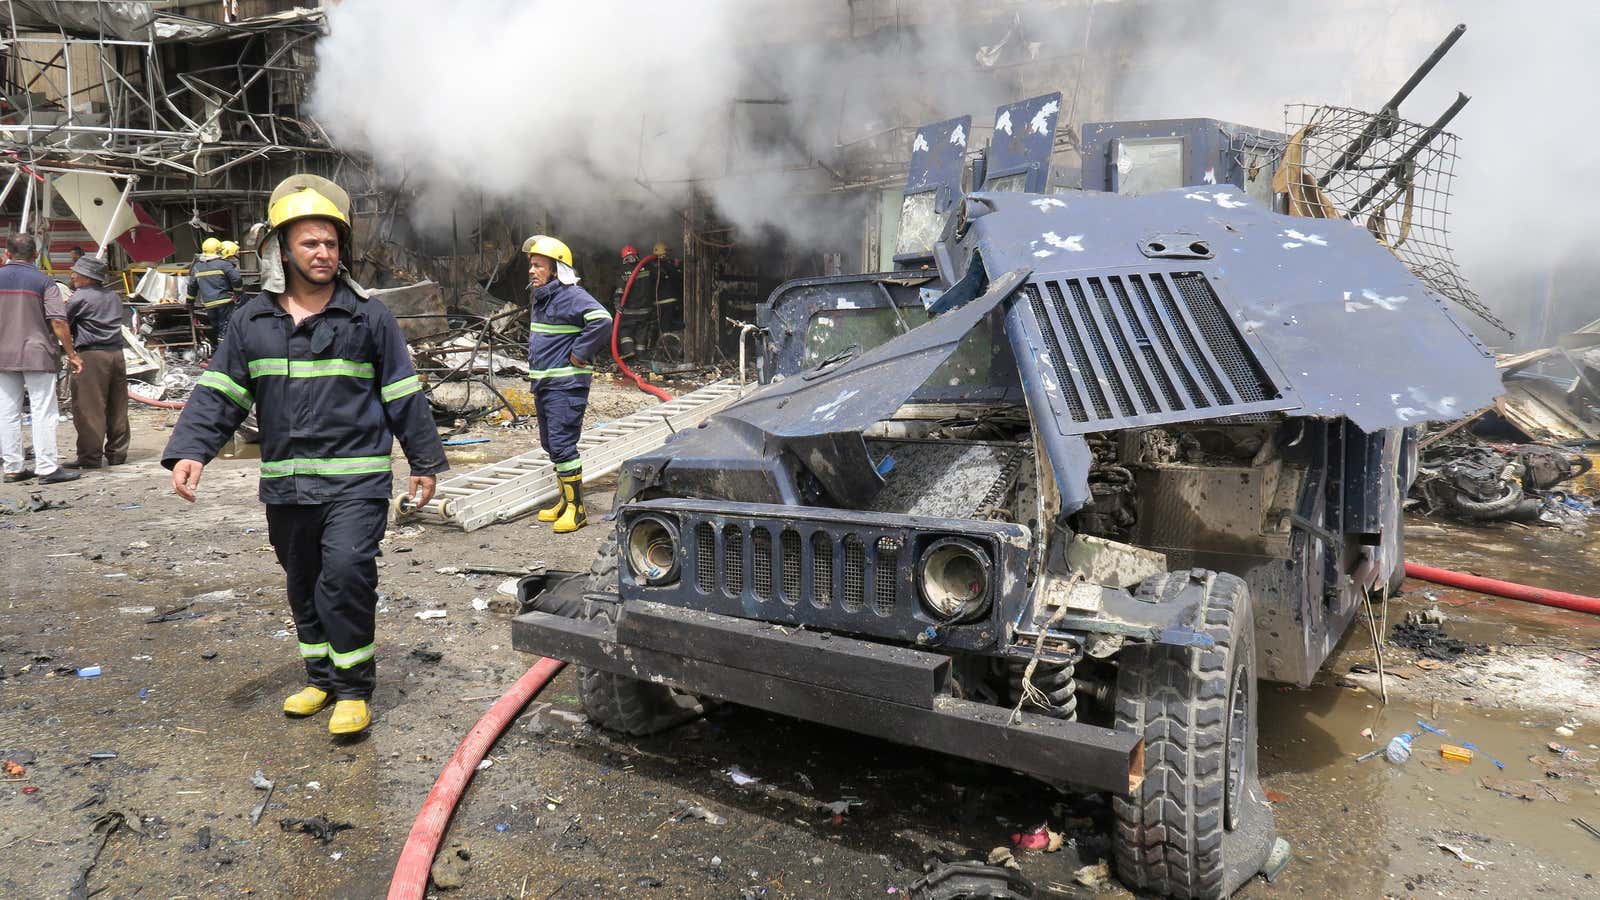 A damaged vehicle of the Iraqi security forces is seen at the site of a car bomb attack in Baghdad last month.